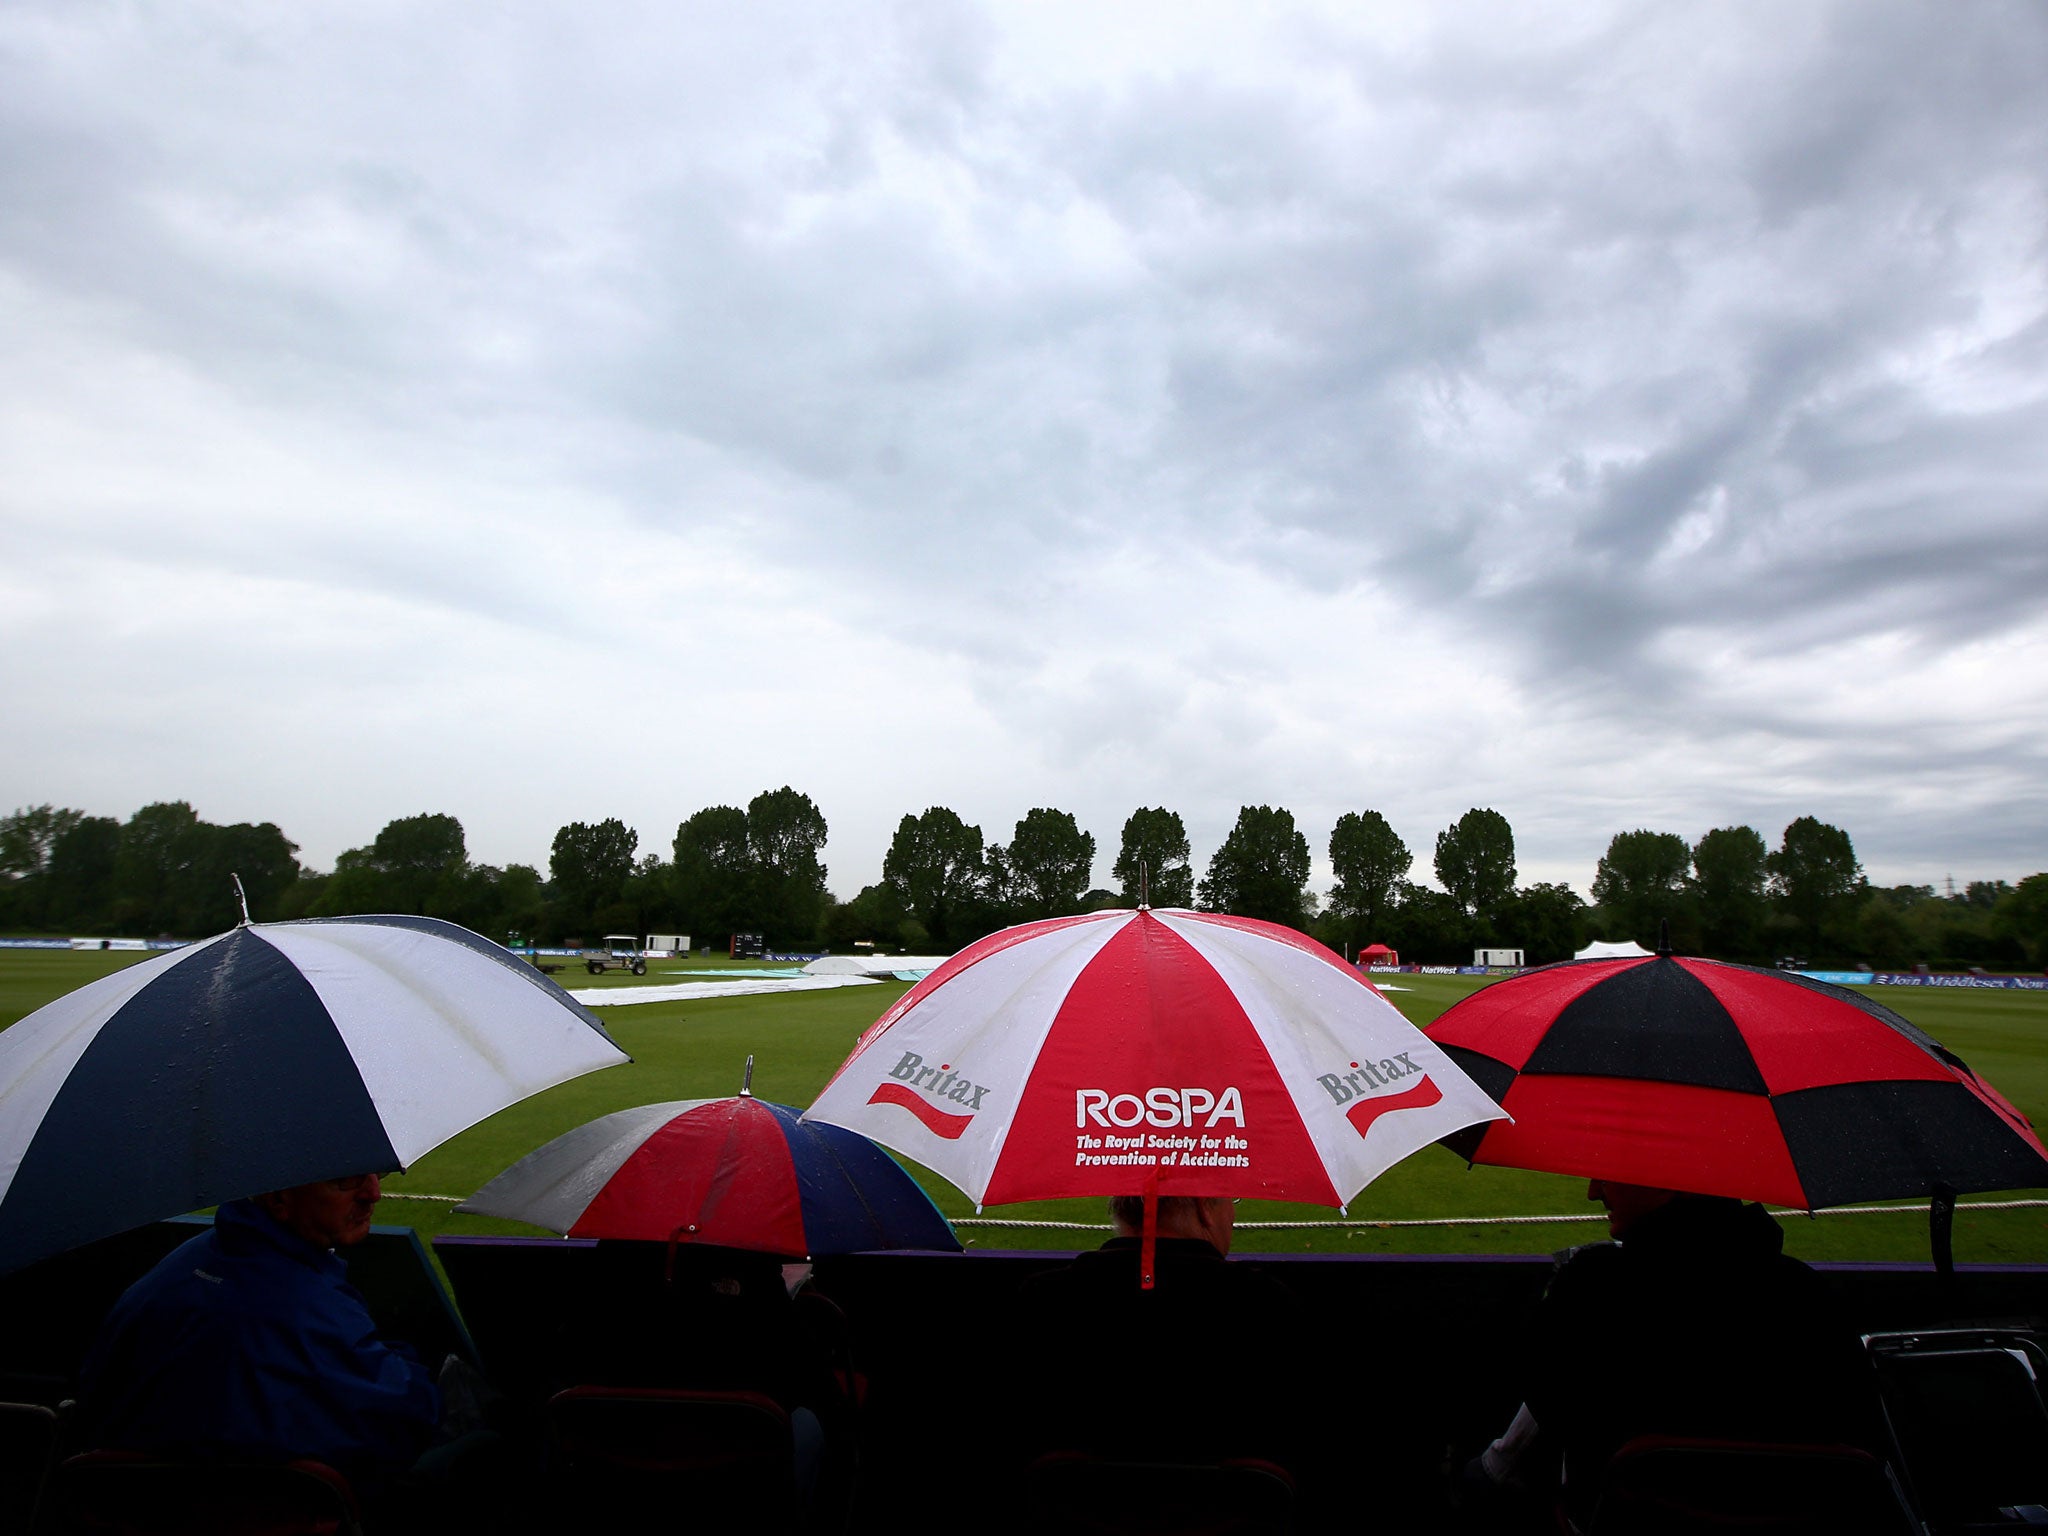 Spectators take shelter as the rain covers come on and the start of play is delayed during the LV County Championship match between Middlesex and Sussex on 26 May in Northwood, England